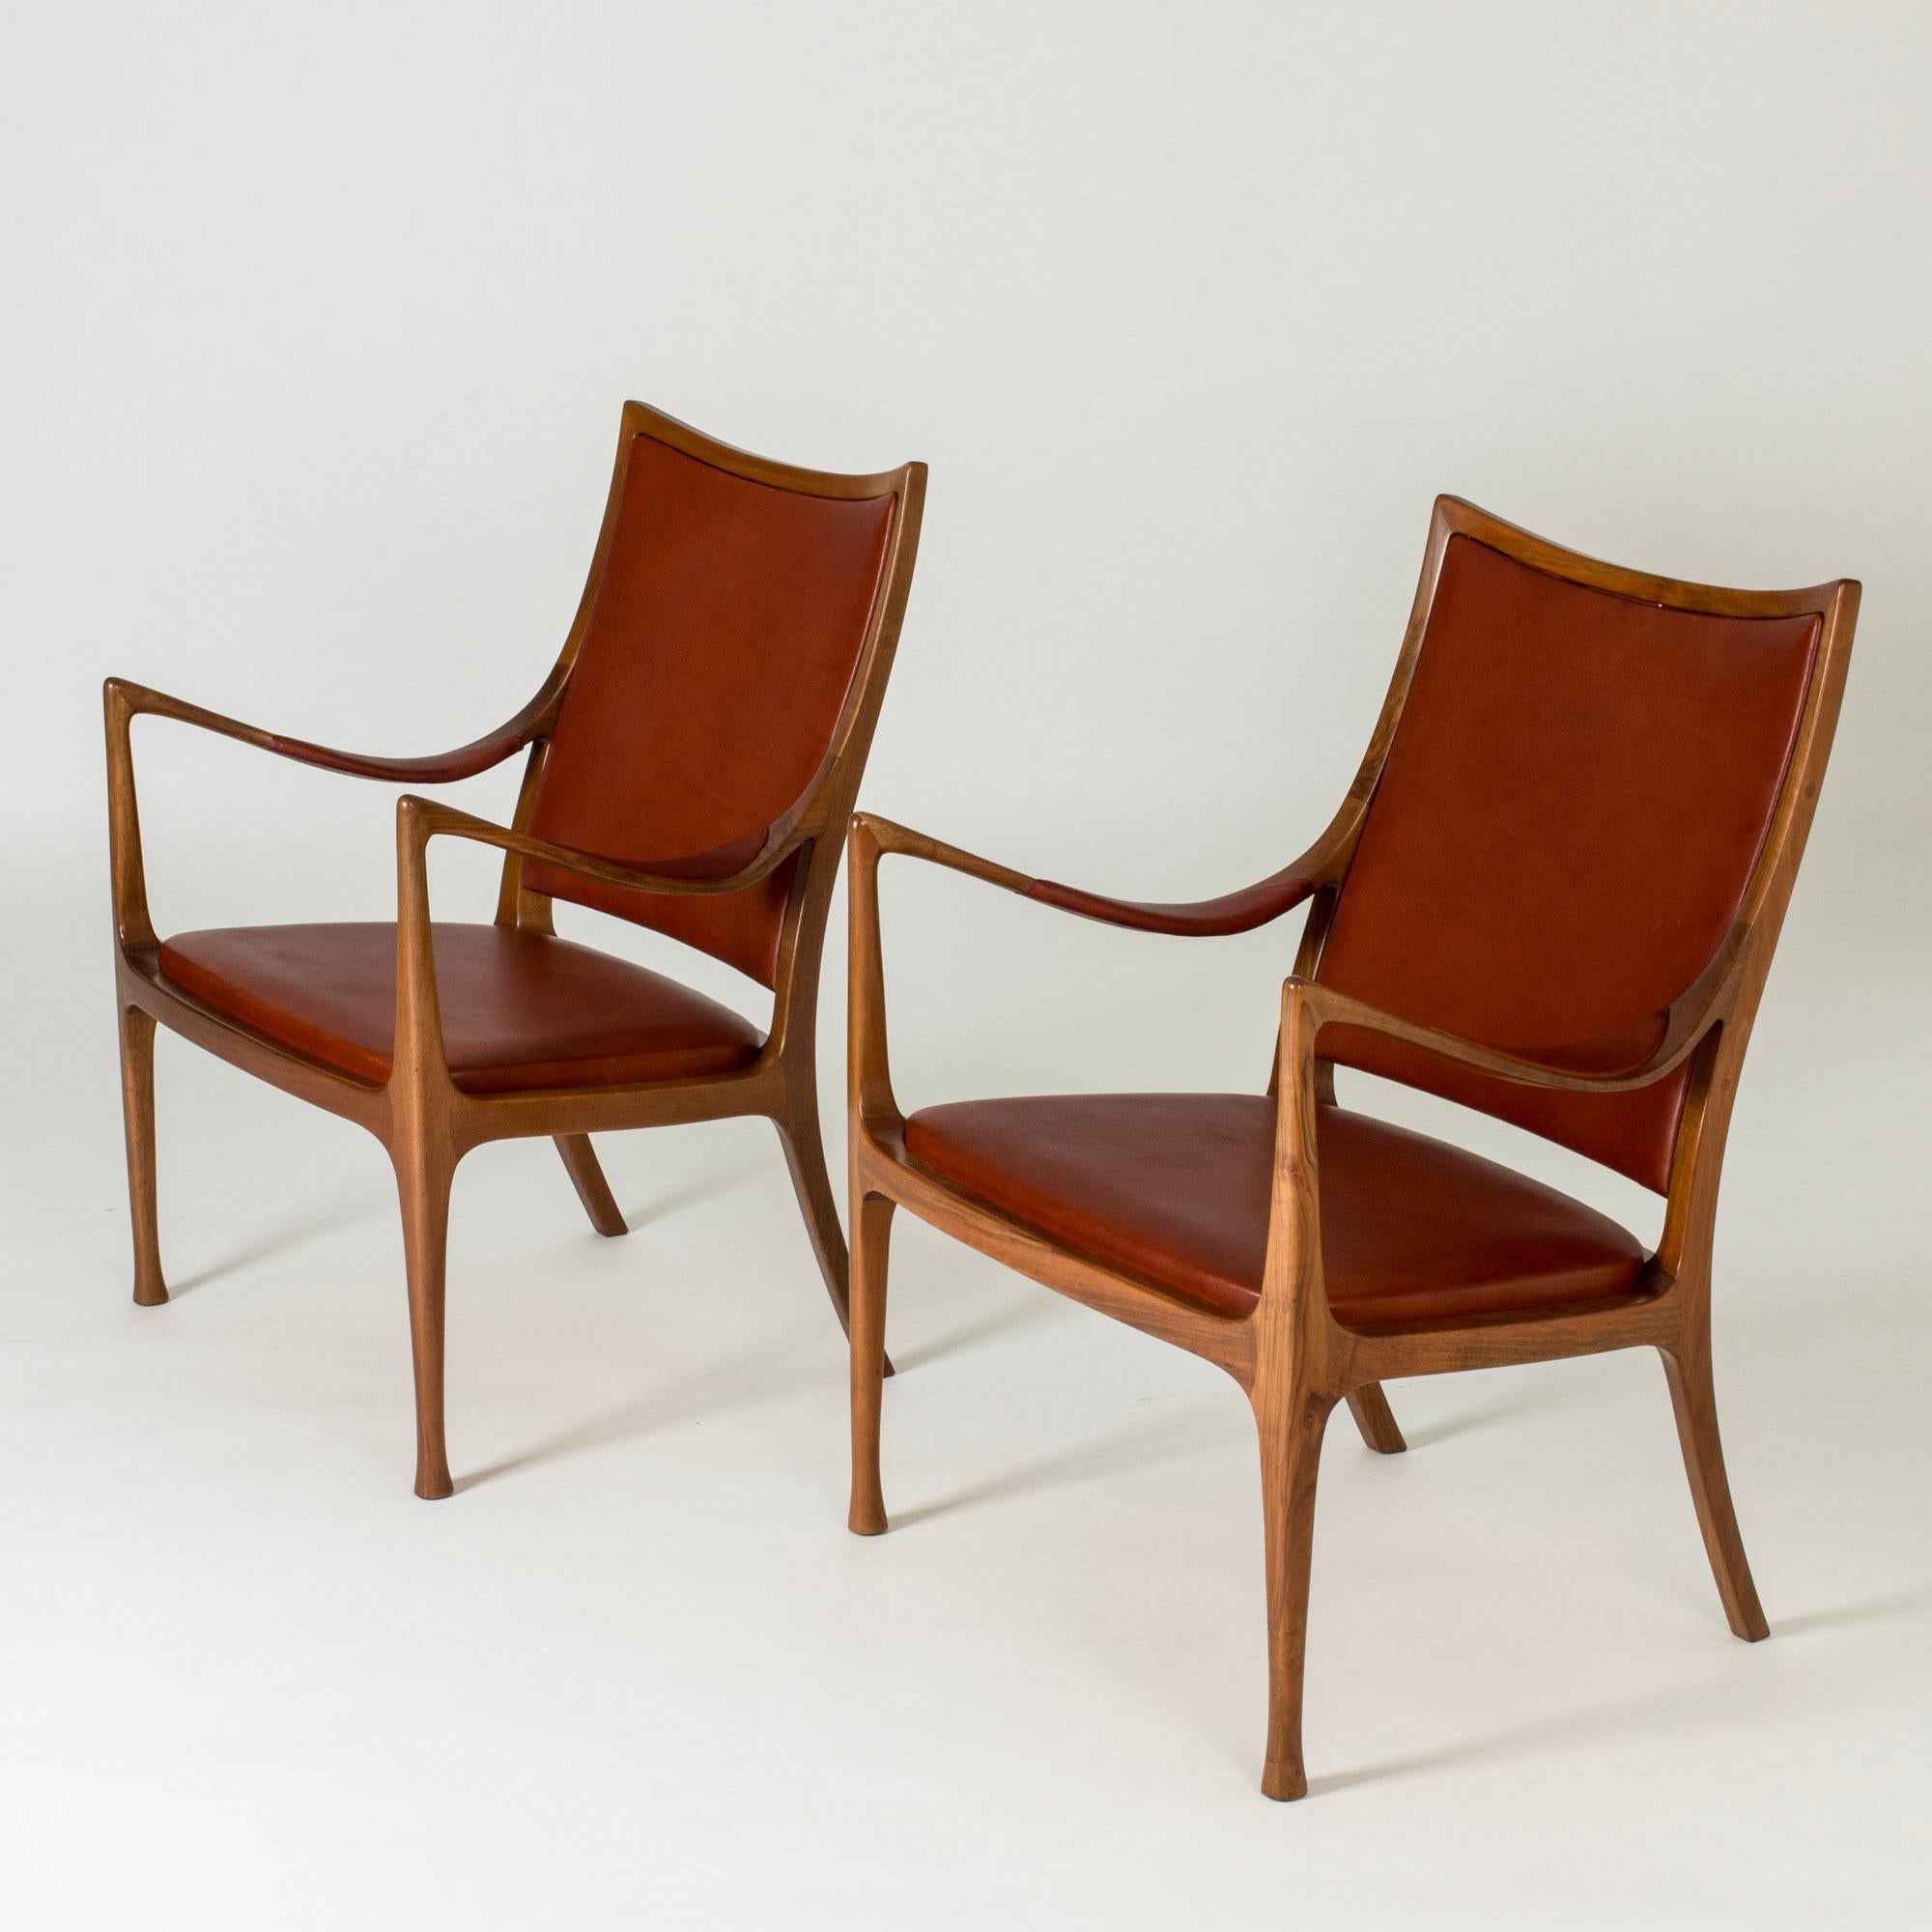 Pair of amazing lounge chairs by Hans Asplund, made in mahogany with leather seats and backs, and a leather detail on the armrests. Striking silhouettes, exquisite execution.

The chairs were custom made for the beauty lounge in the NK department